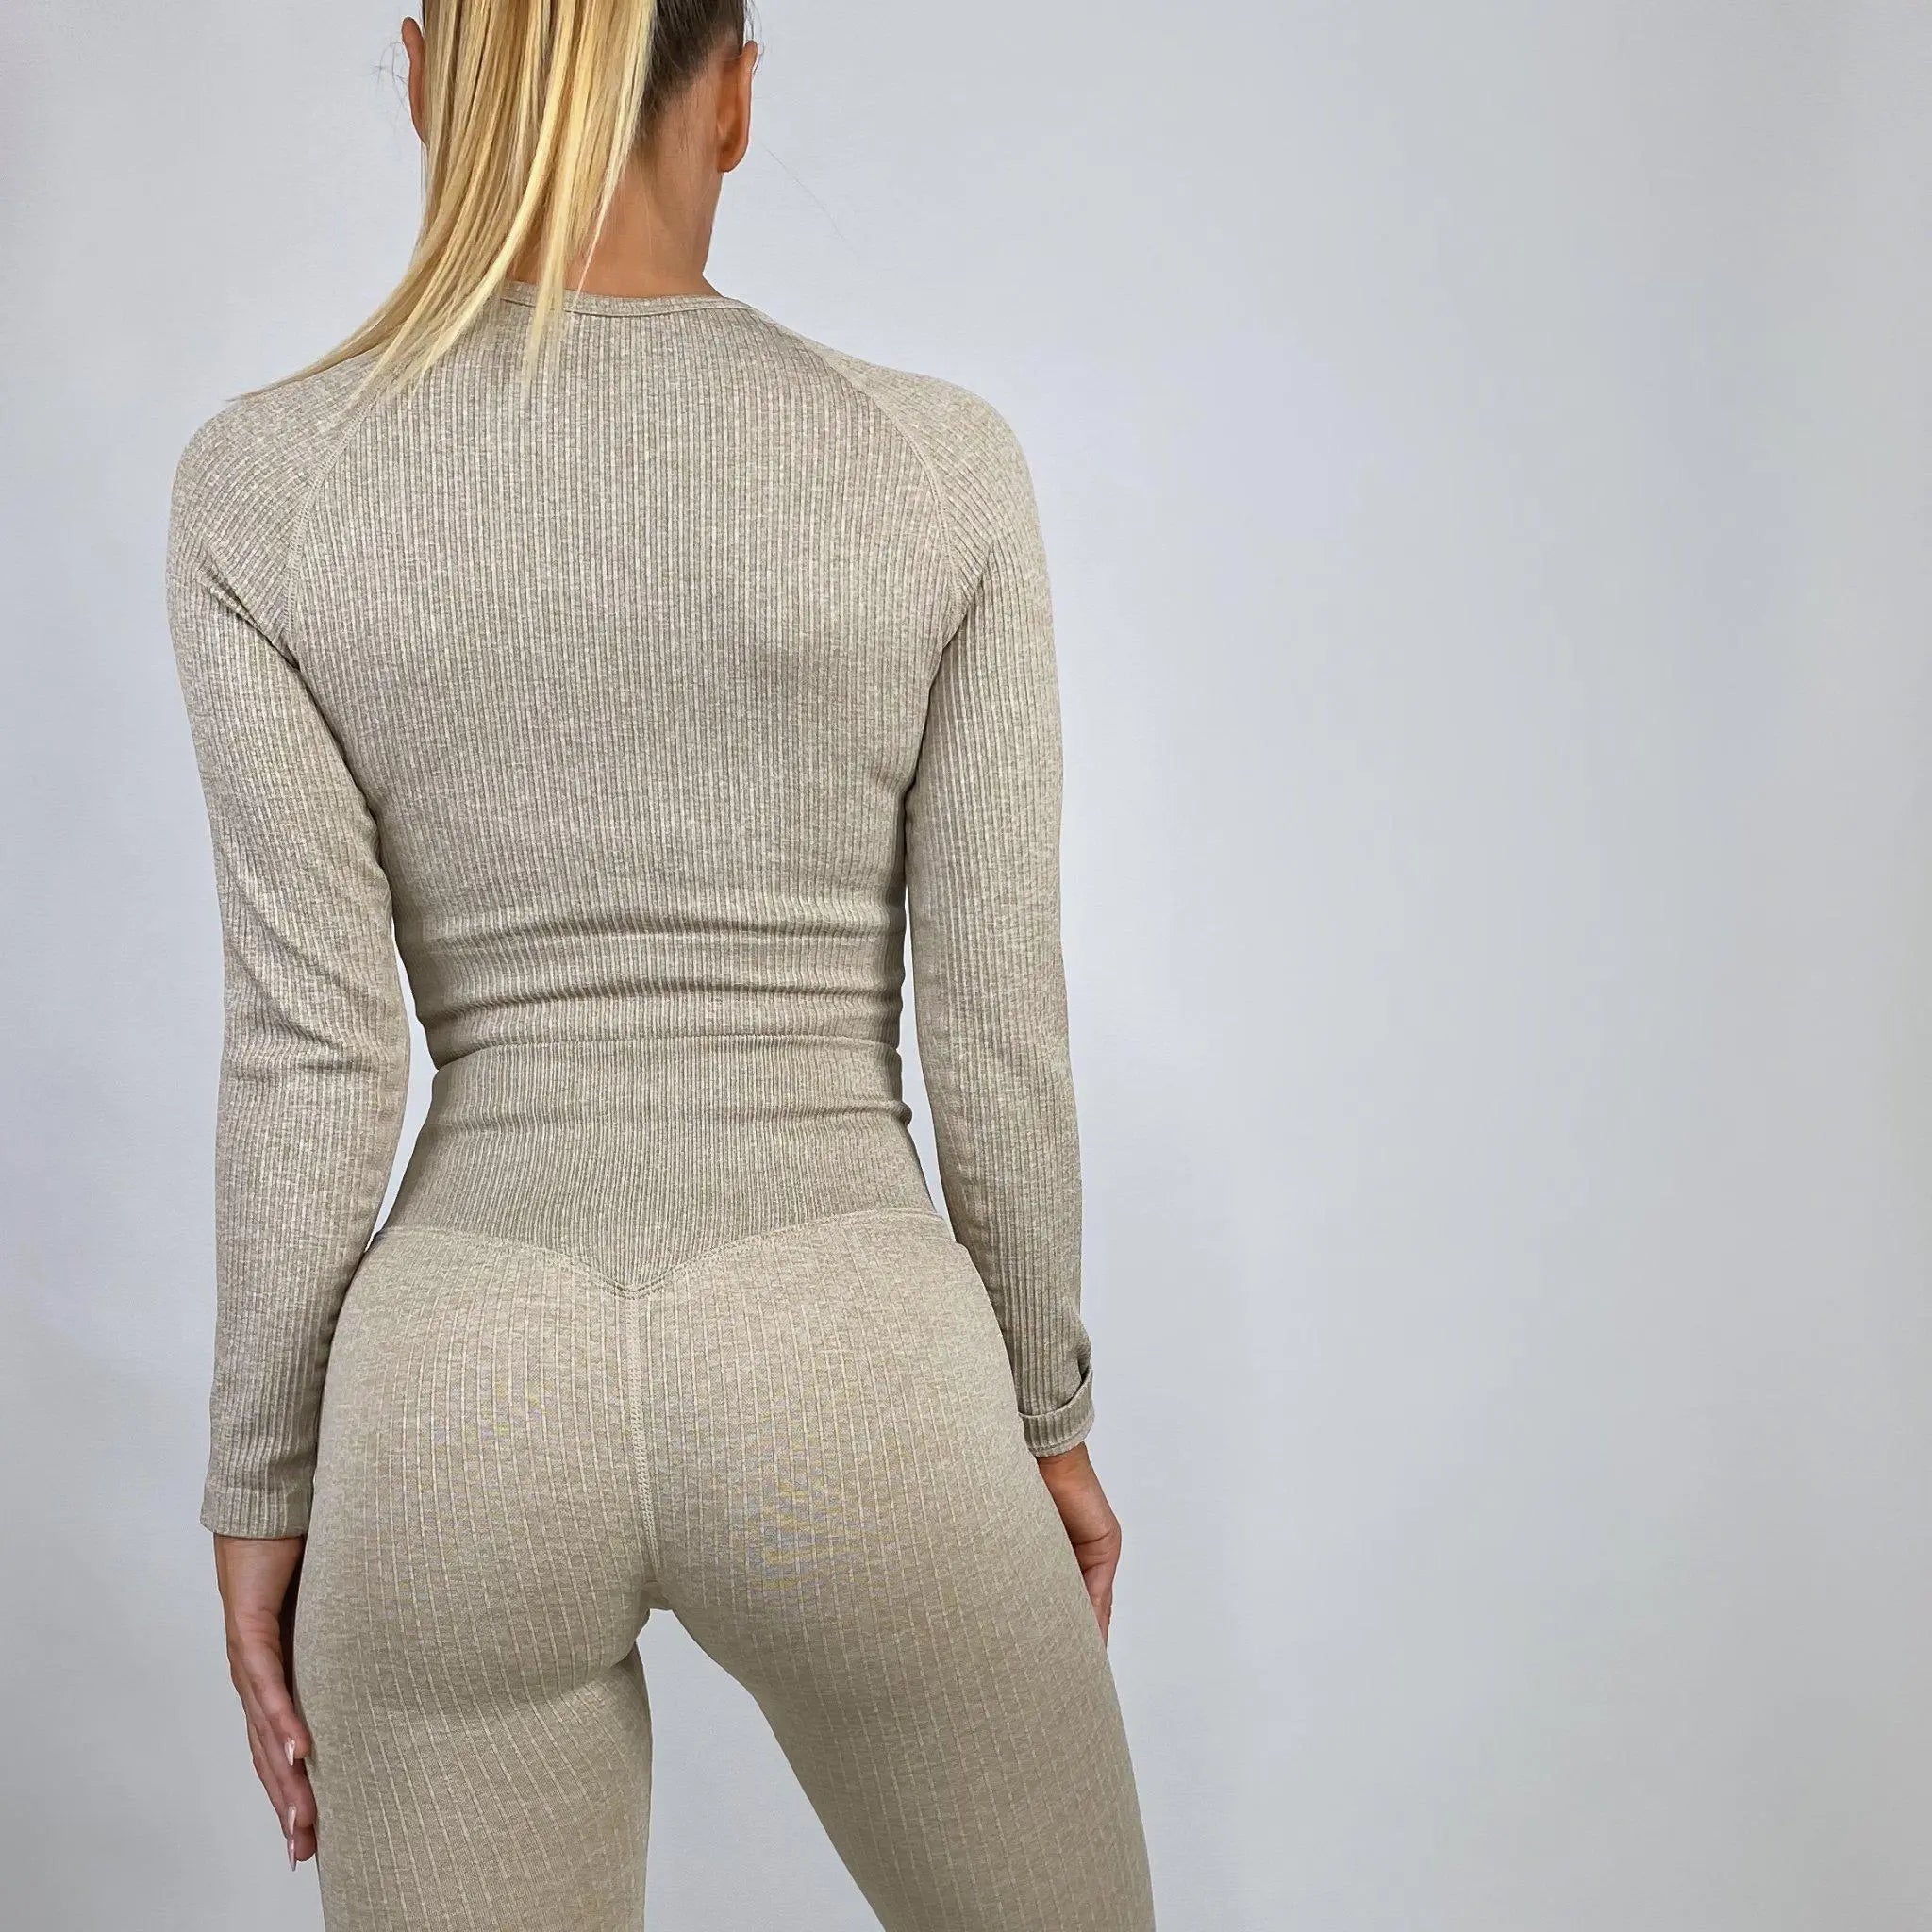 Ribbed Tights + Top - Beige-Tights + Crop Top-Paninisport.no